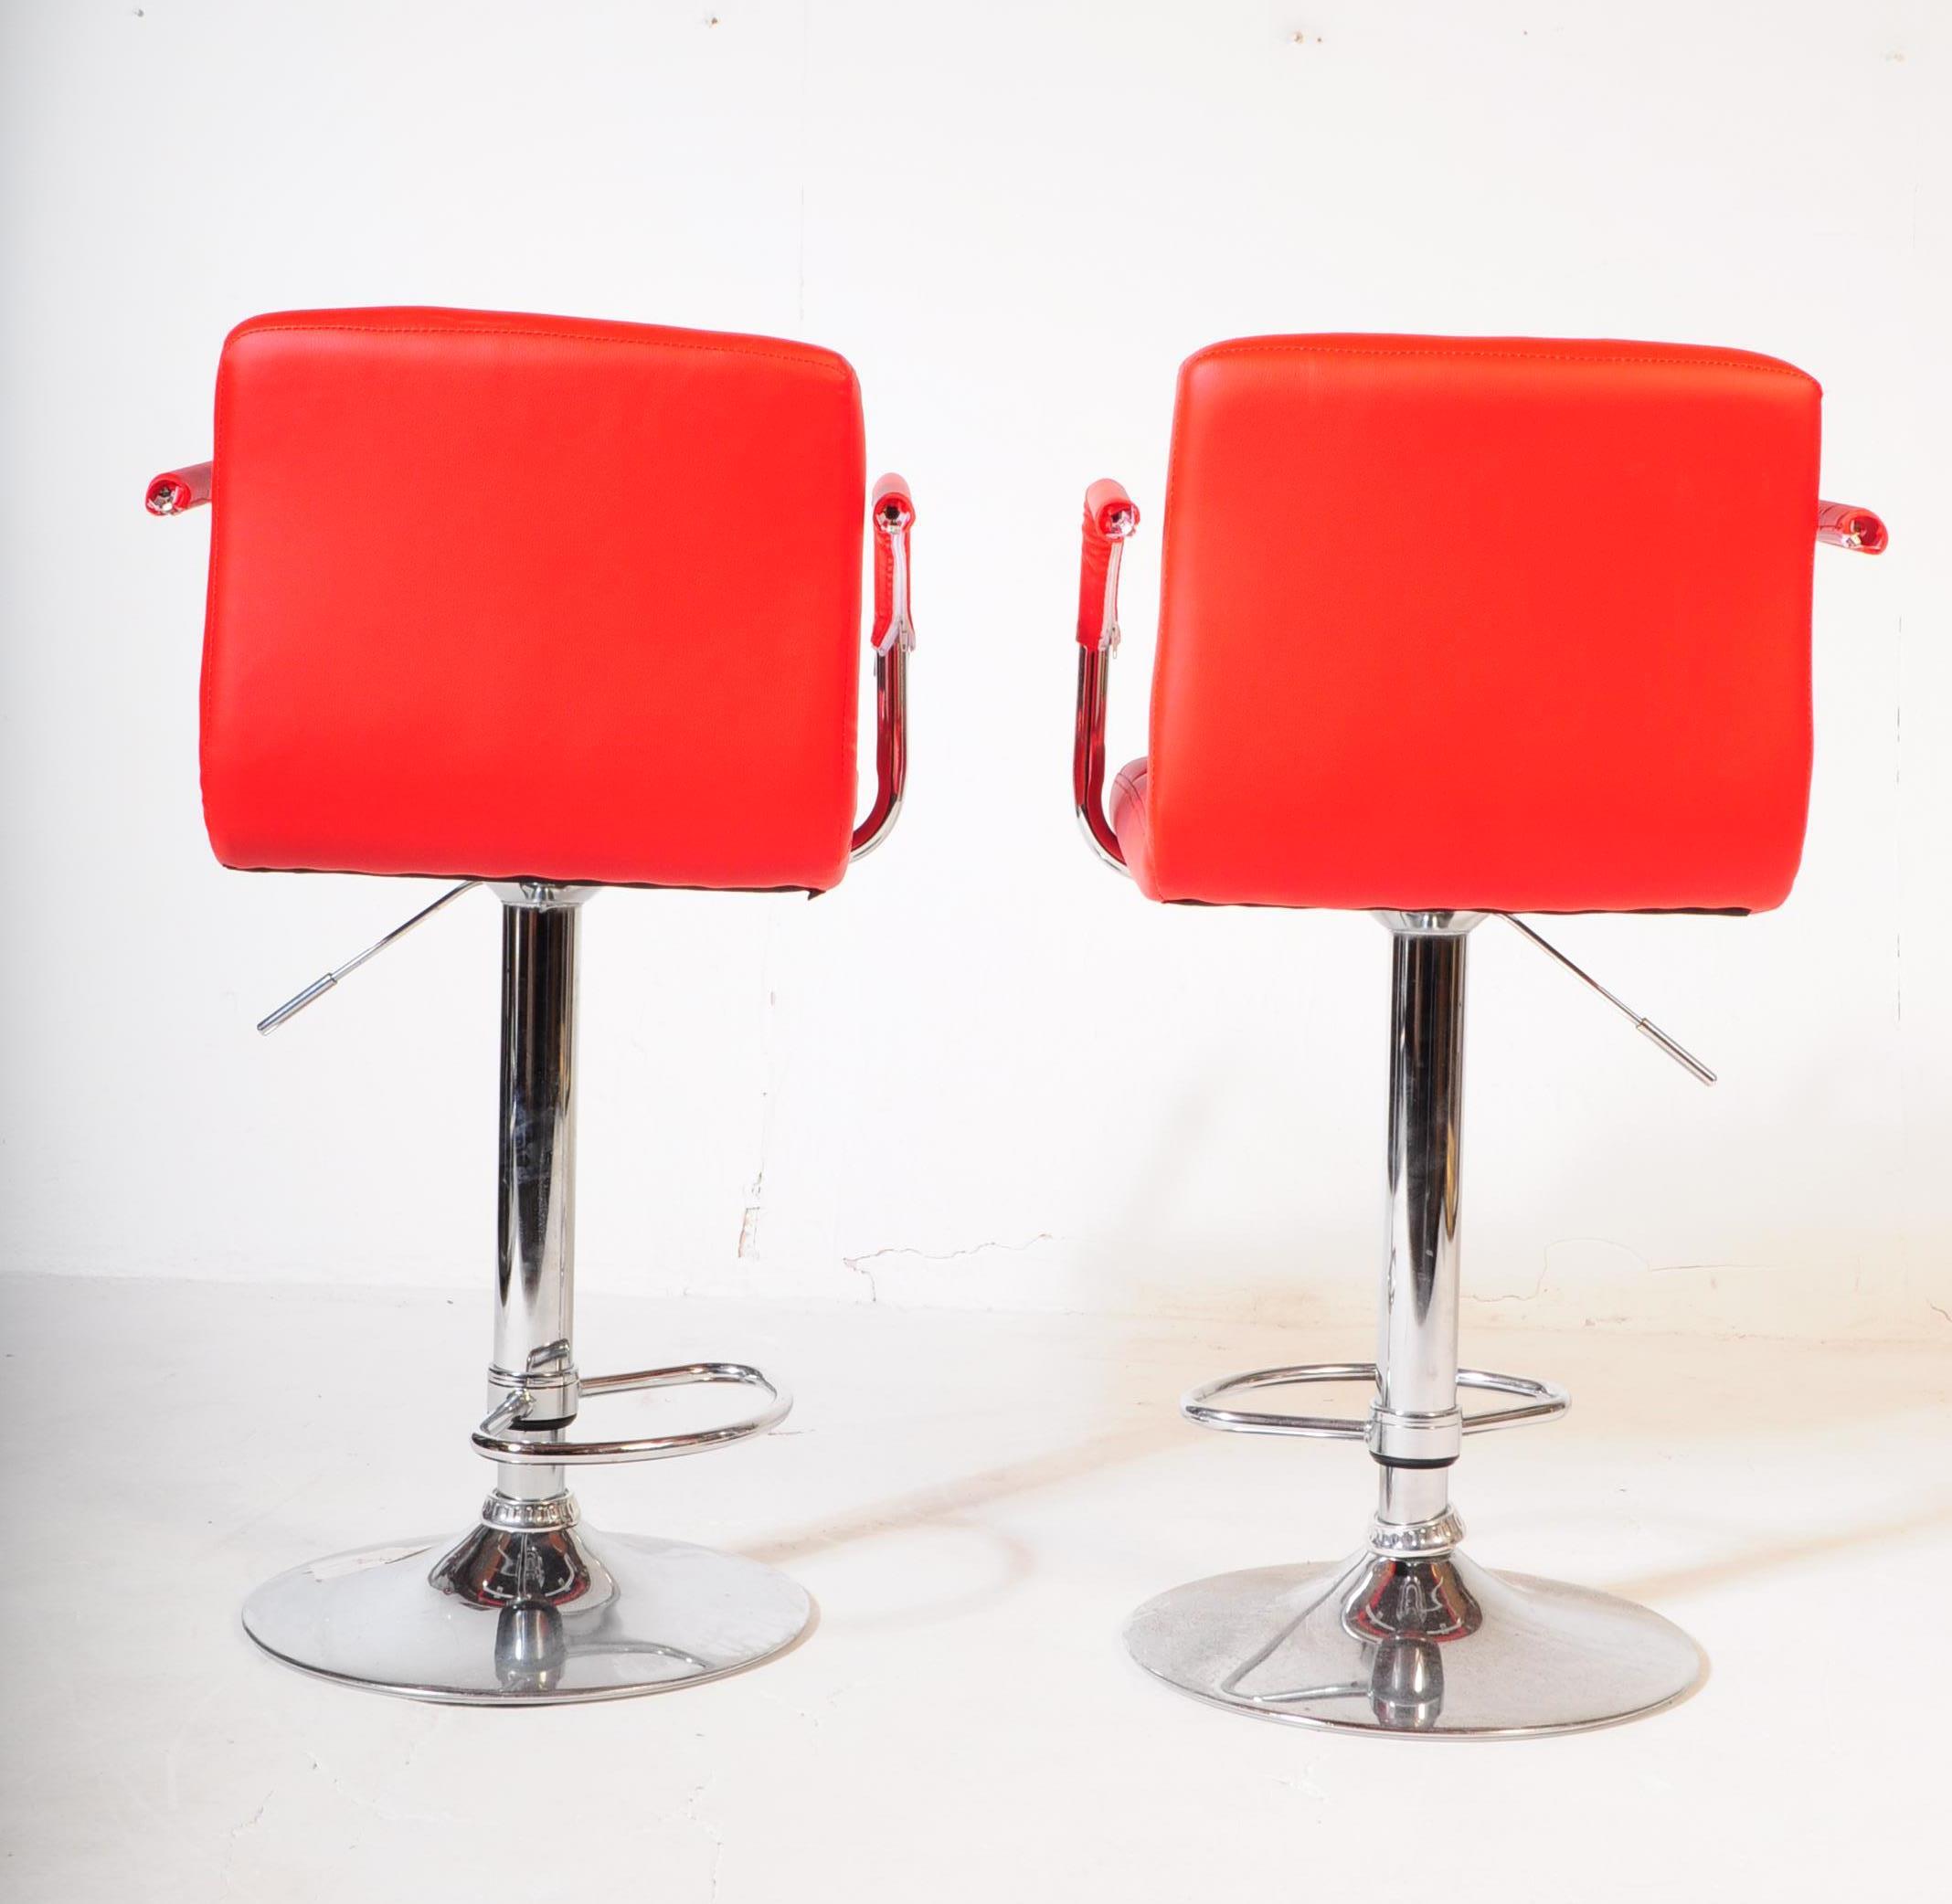 PAIR OF CONTEMPORARY VINYL RED & WHITE BAR STOOLS - Image 4 of 6